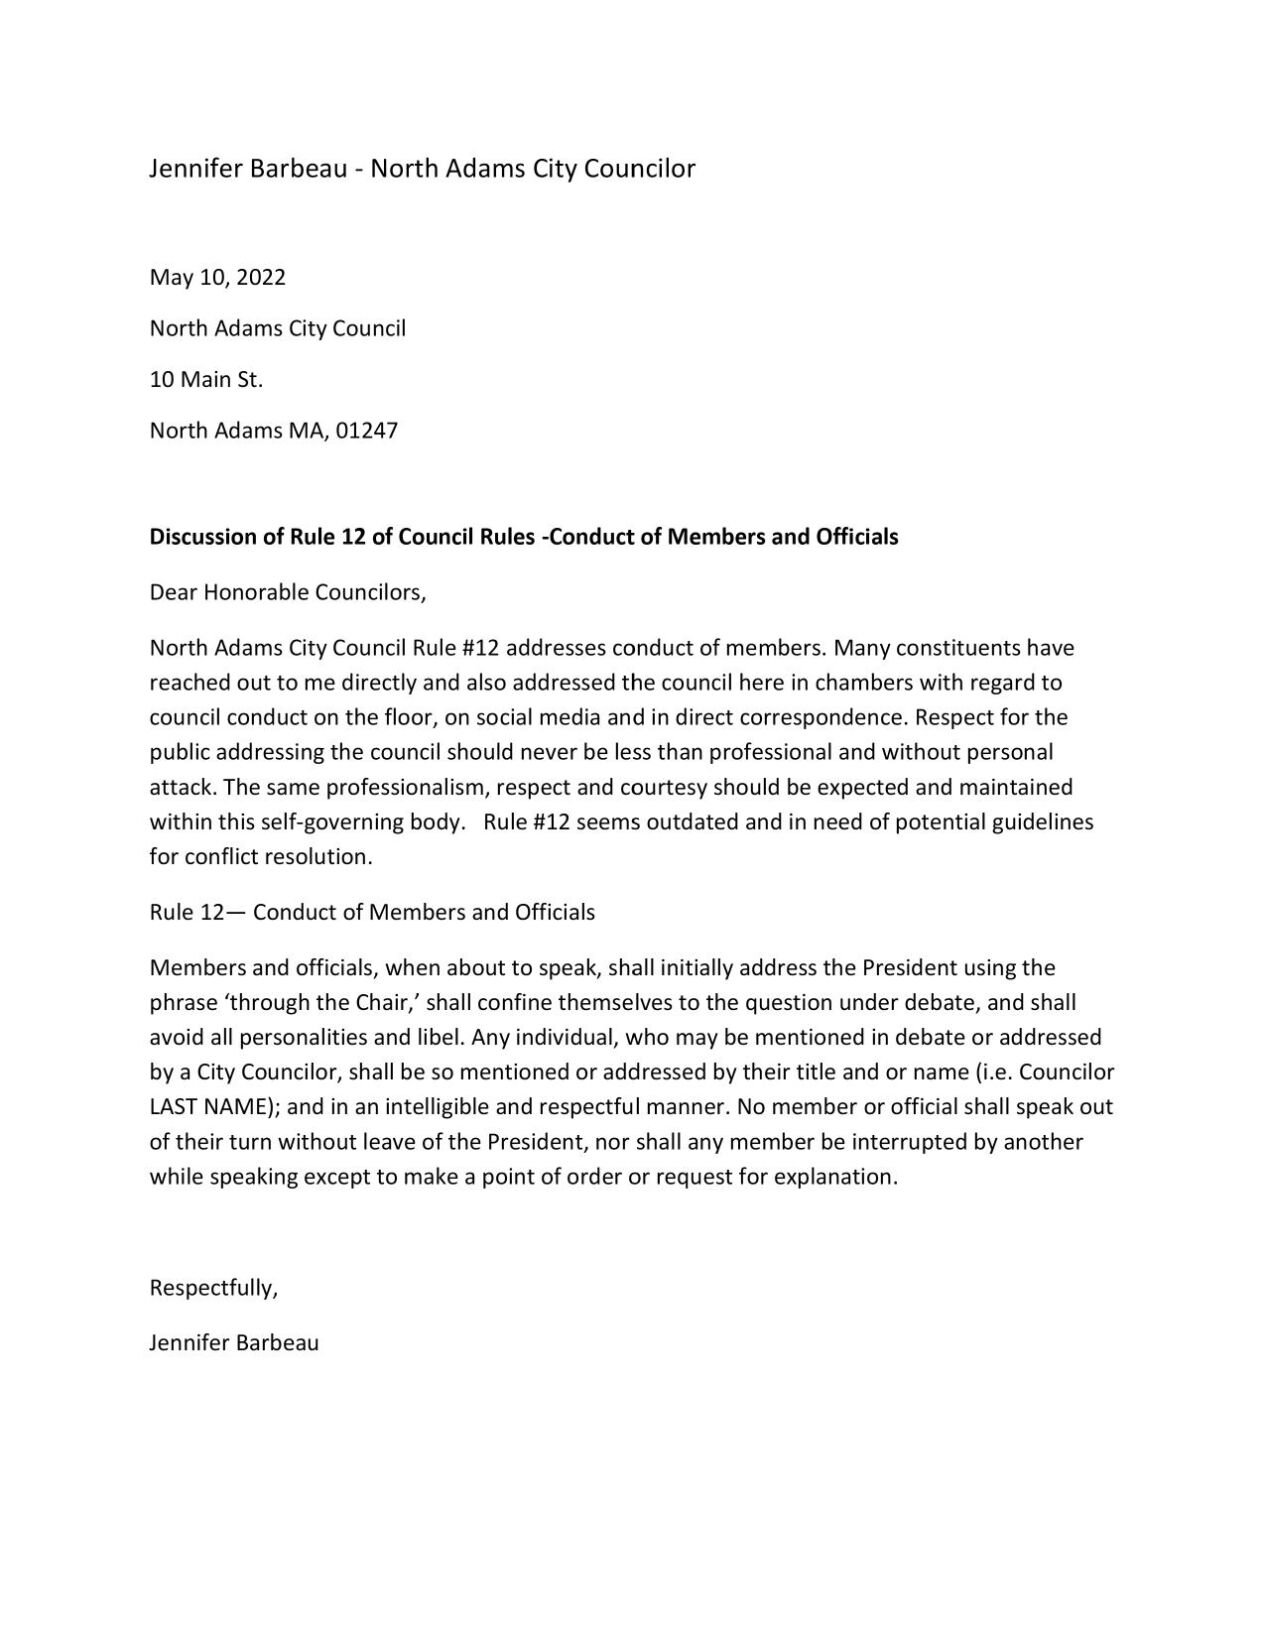 Letter from Councilor Barbeau about council conduct